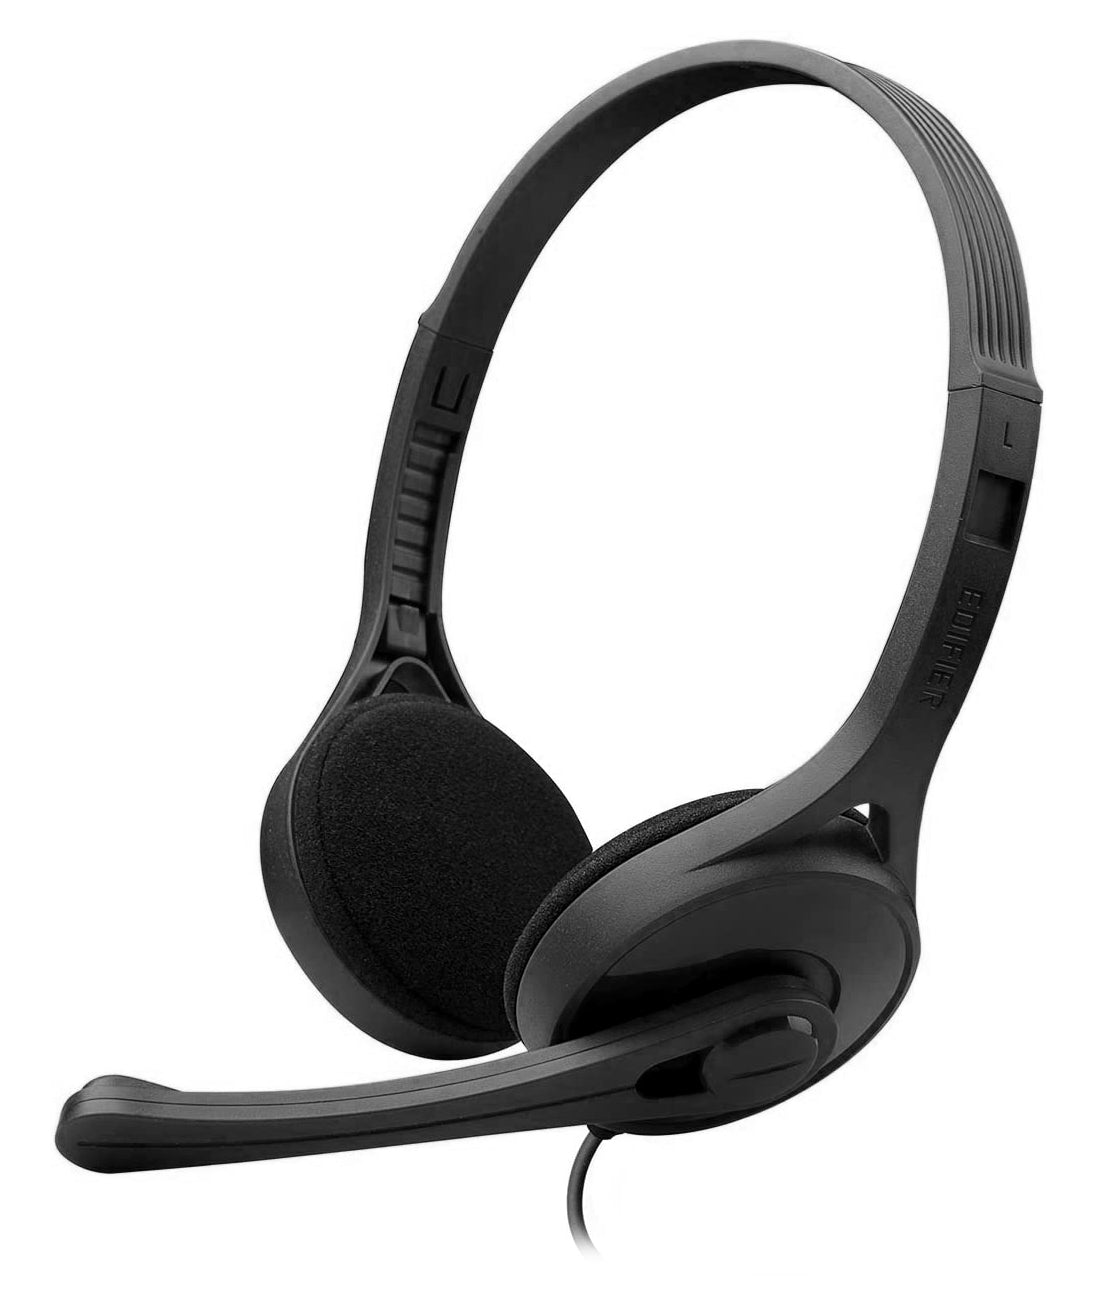 Edifier K550 PC / Laptop / Computer Wired 3.5mm Headset With Microphone - Black